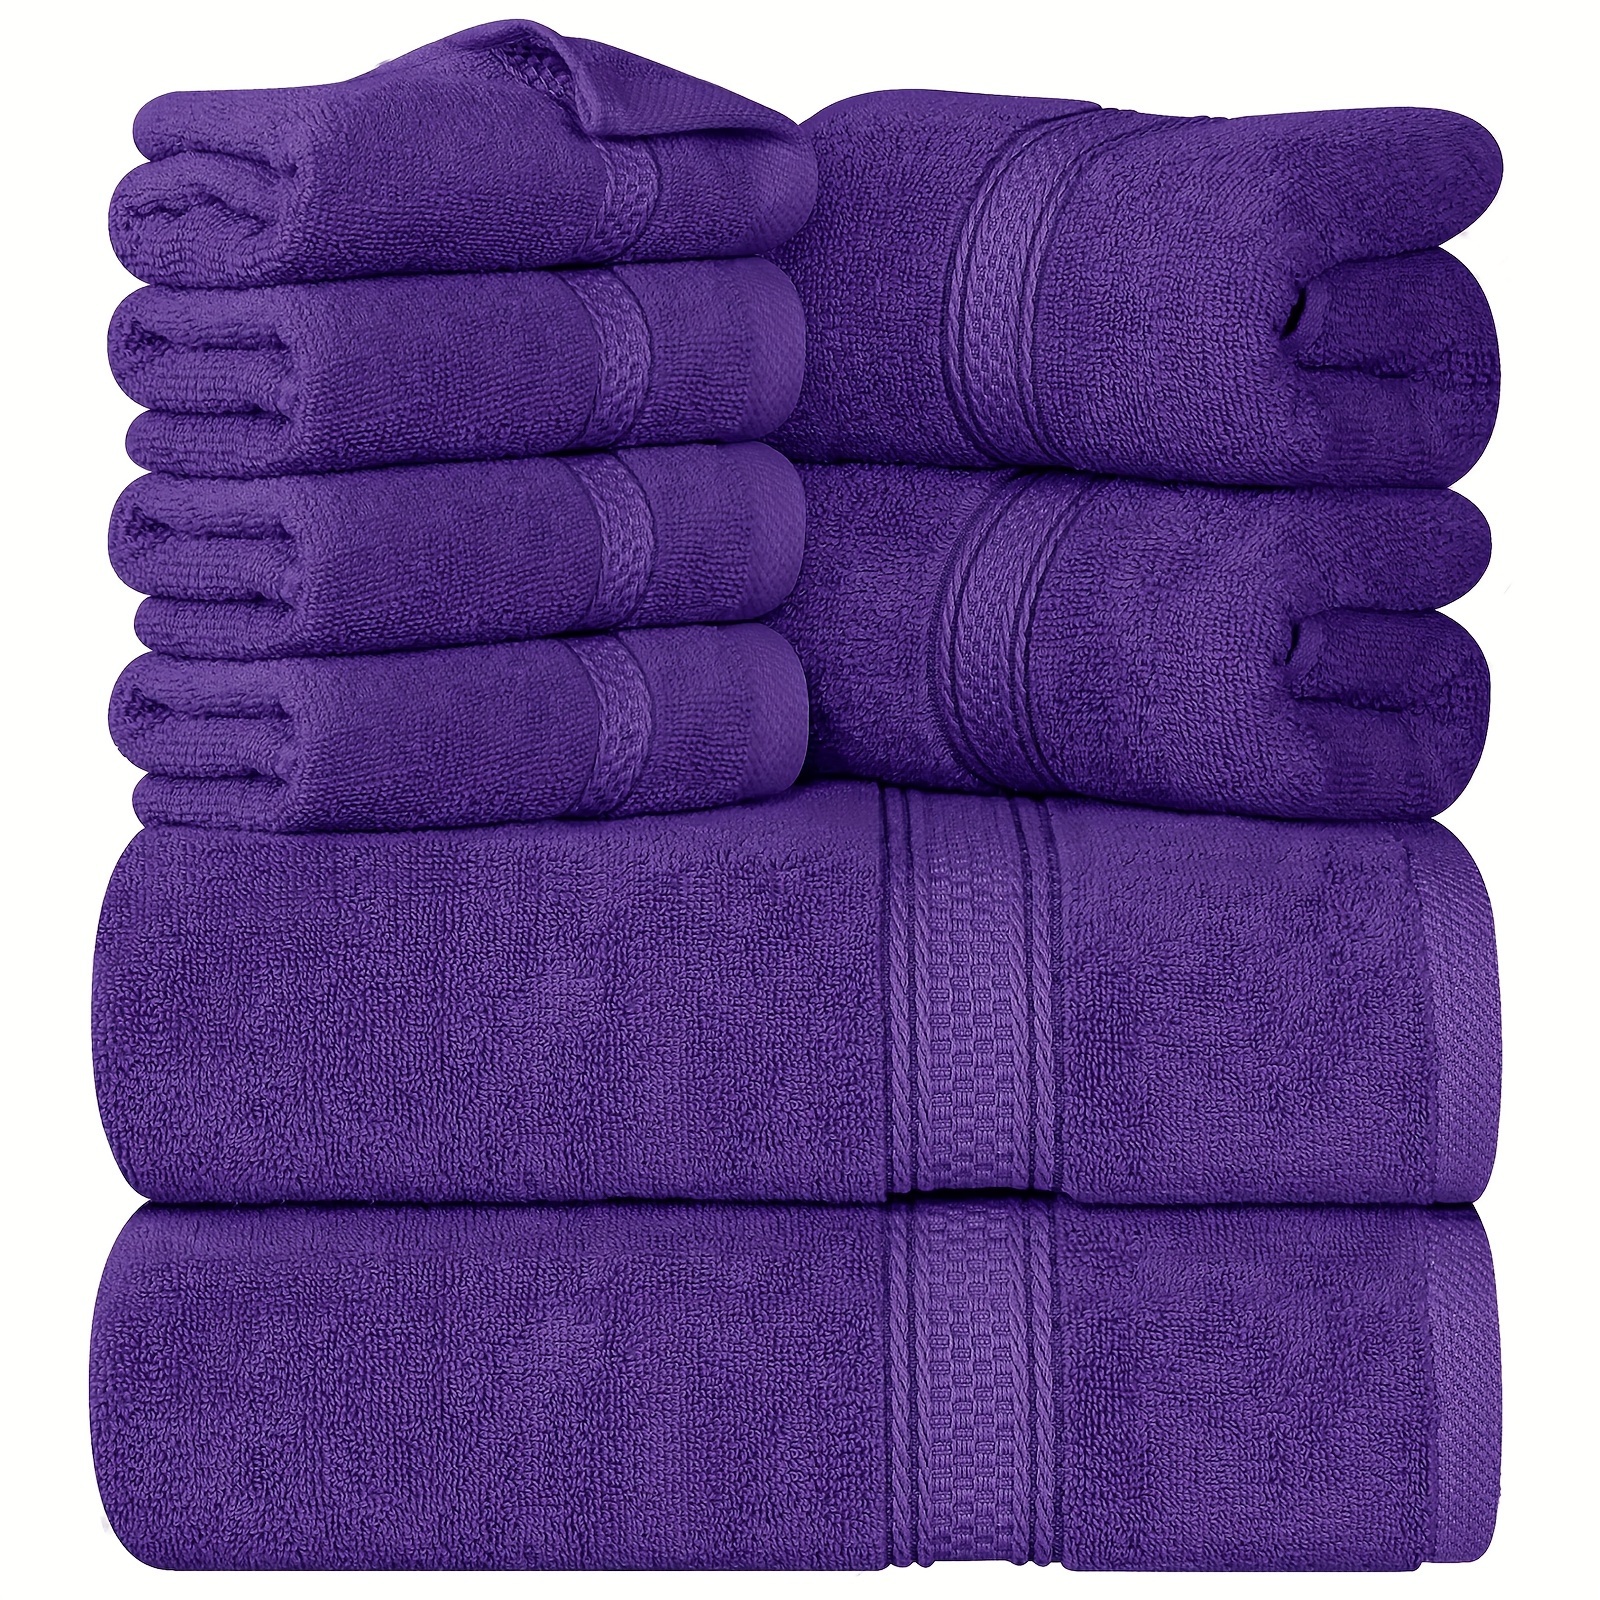 

8-piece Premium Cotton Towel Set - 2 Bath Towels, 2 Hand Towels, 4 Wash Cloths - Contemporary Style, Solid Pattern, Fade Resistant, Space Theme, Woven, 430gsm, Hand Wash Only (purple)